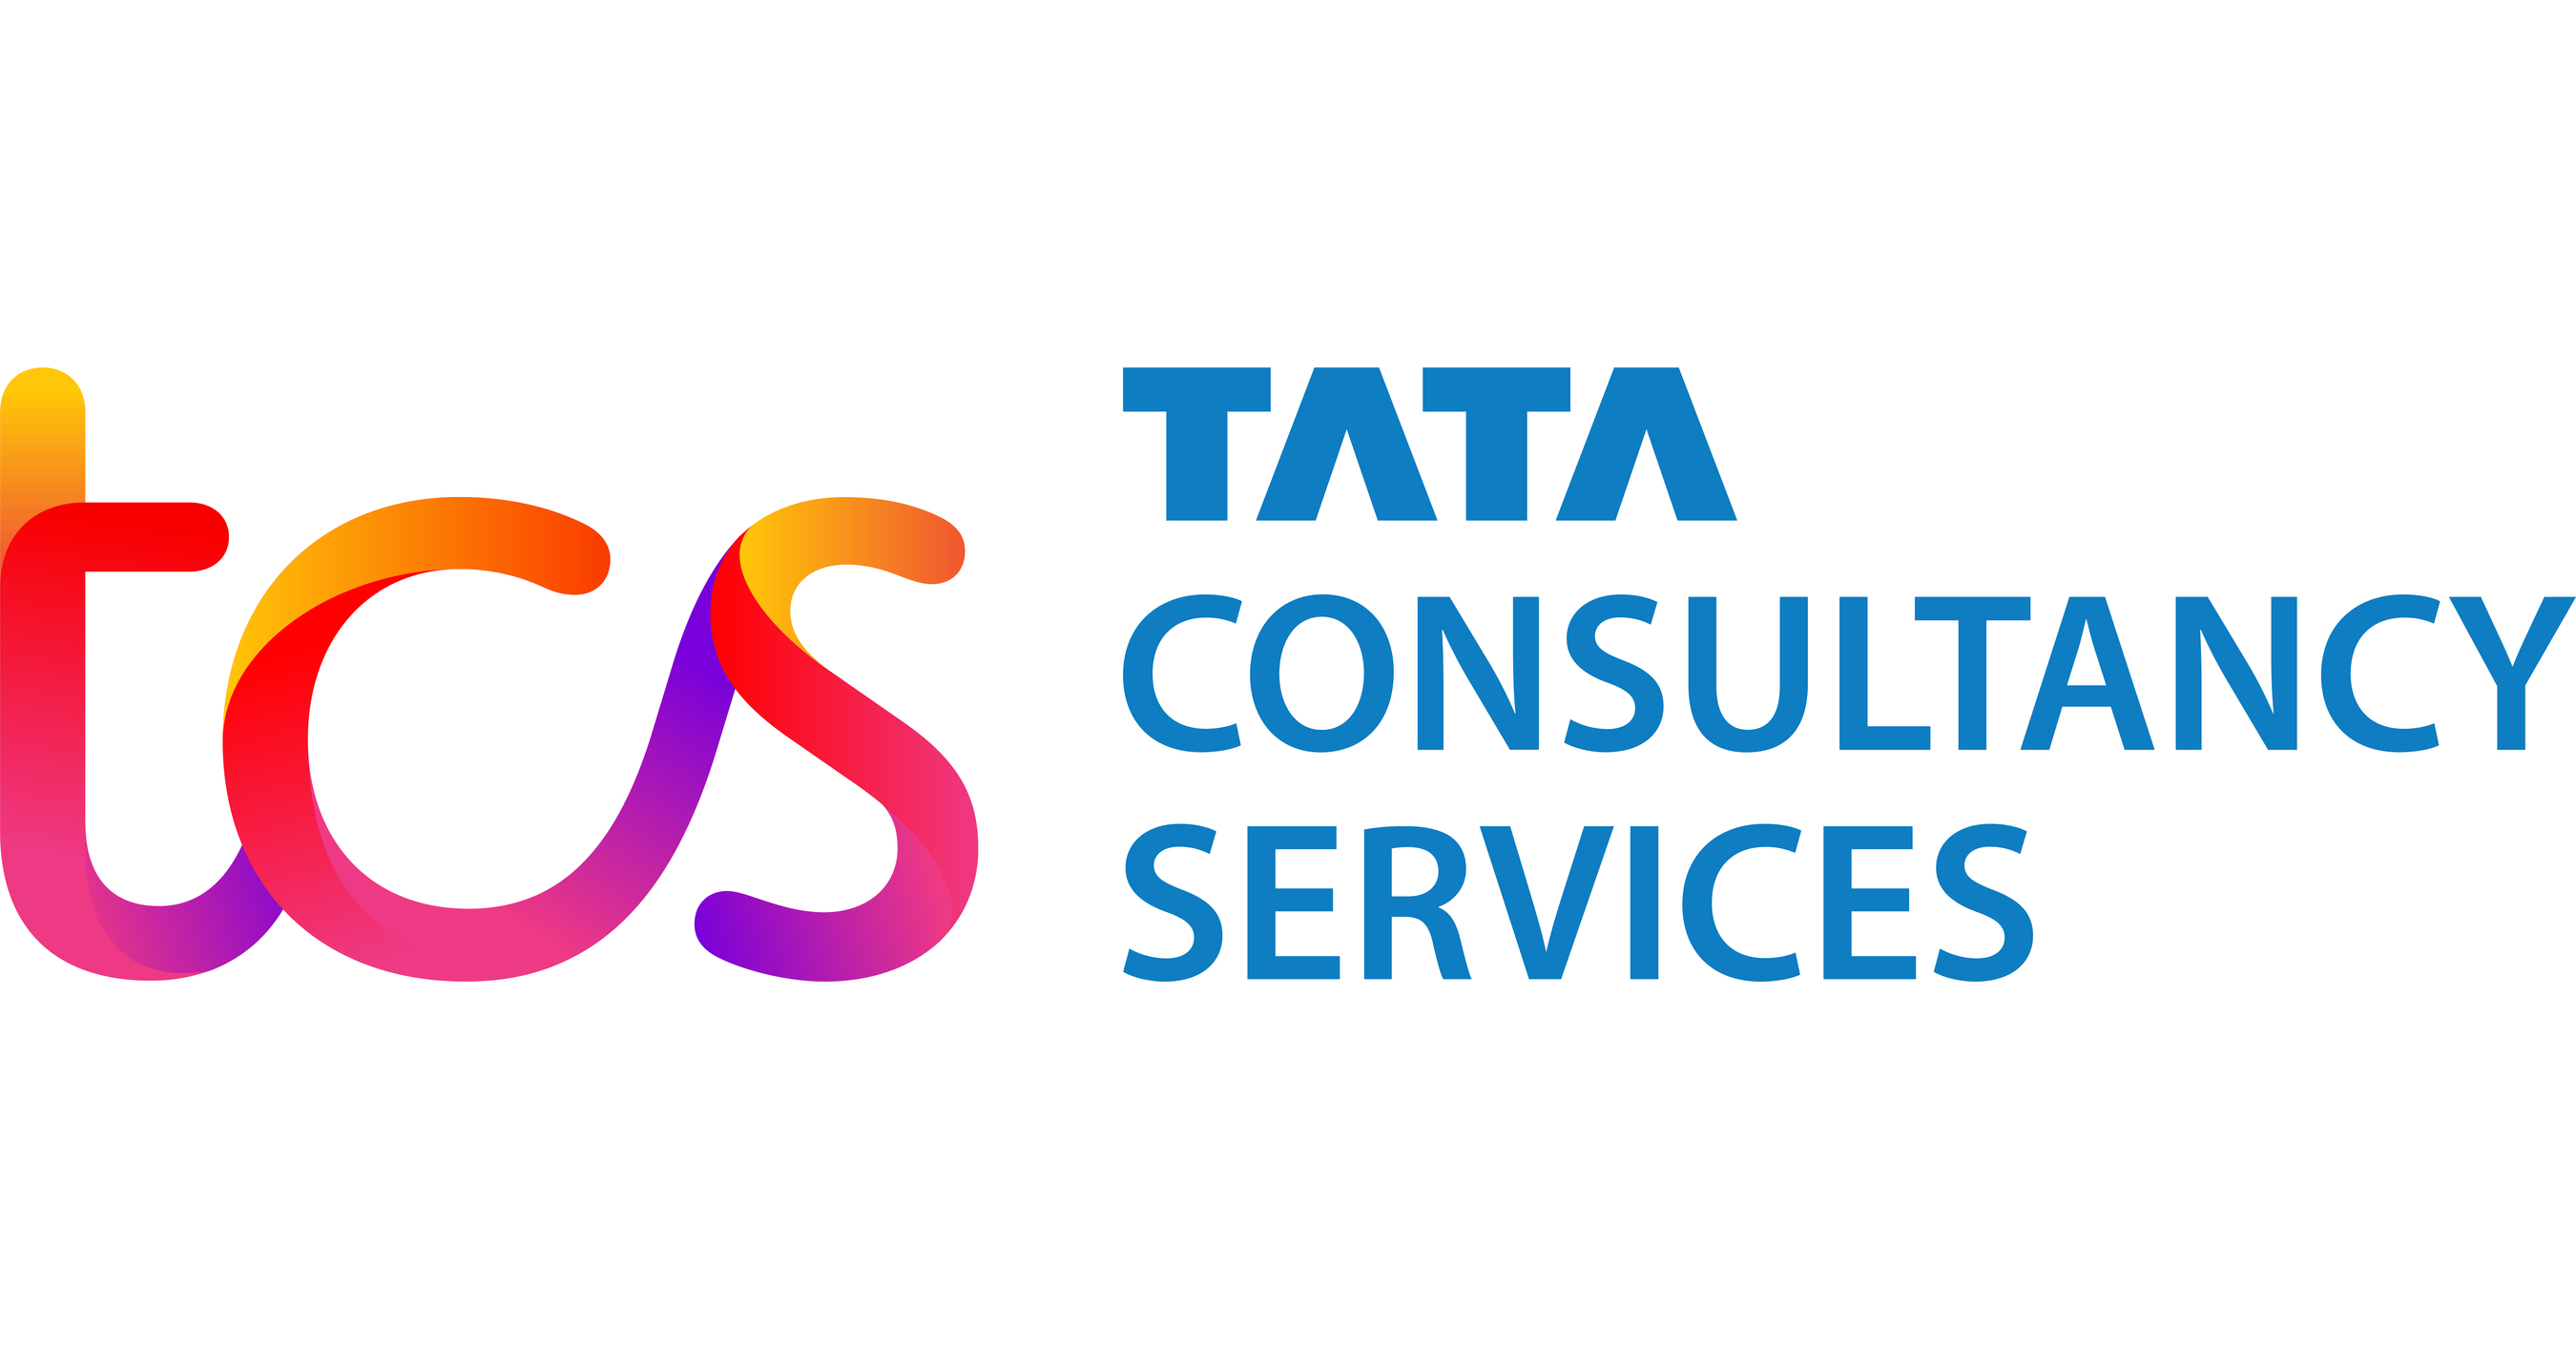 TCS codevita account removed from microsoft authenticator app